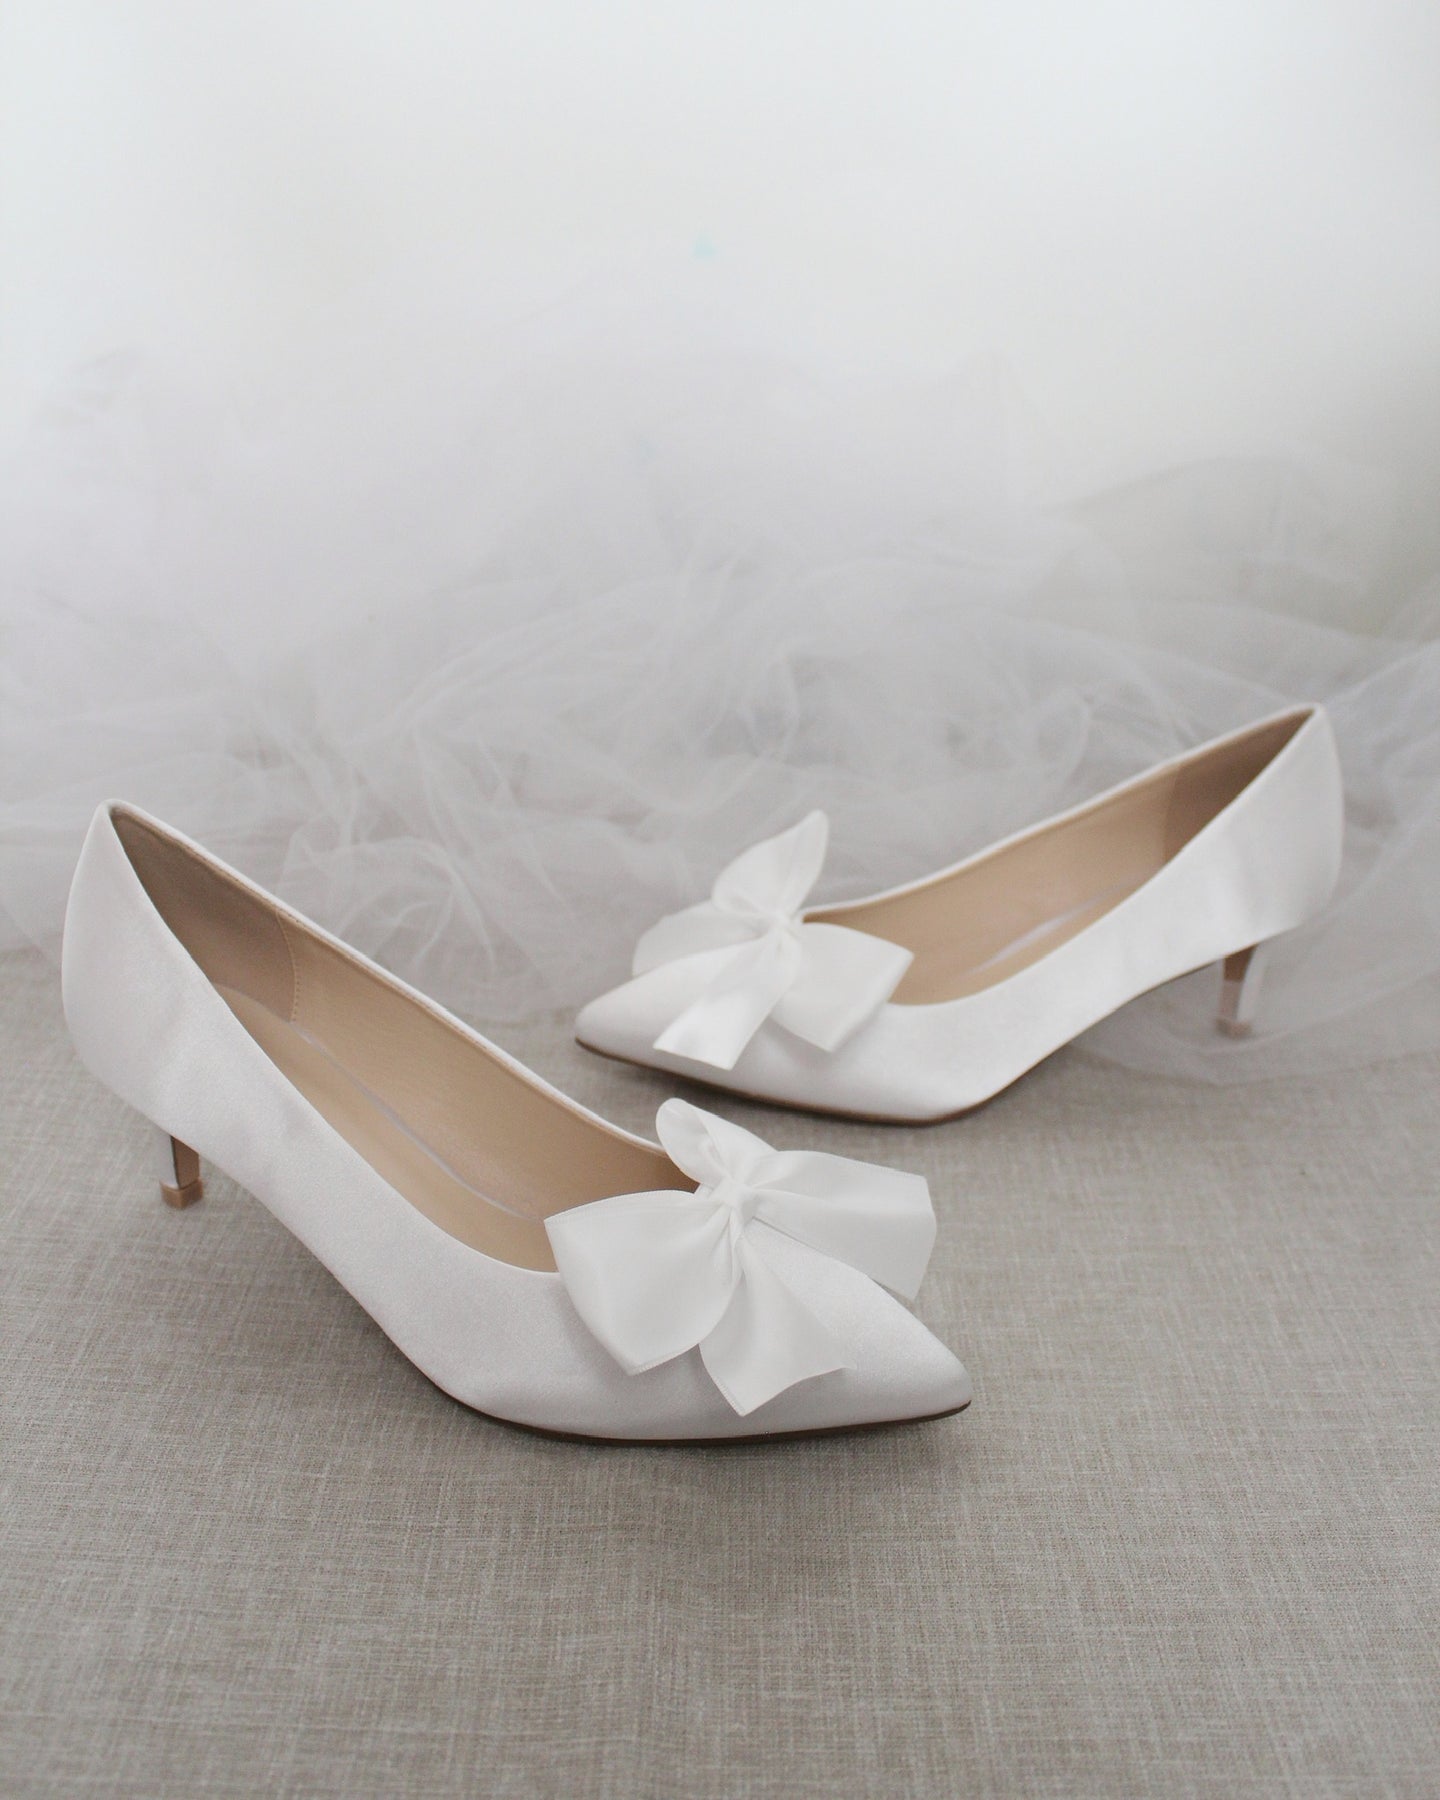 WHITE Satin Pointy Toe Pump Low Heel with SATIN BOW - Wedding Shoes ...